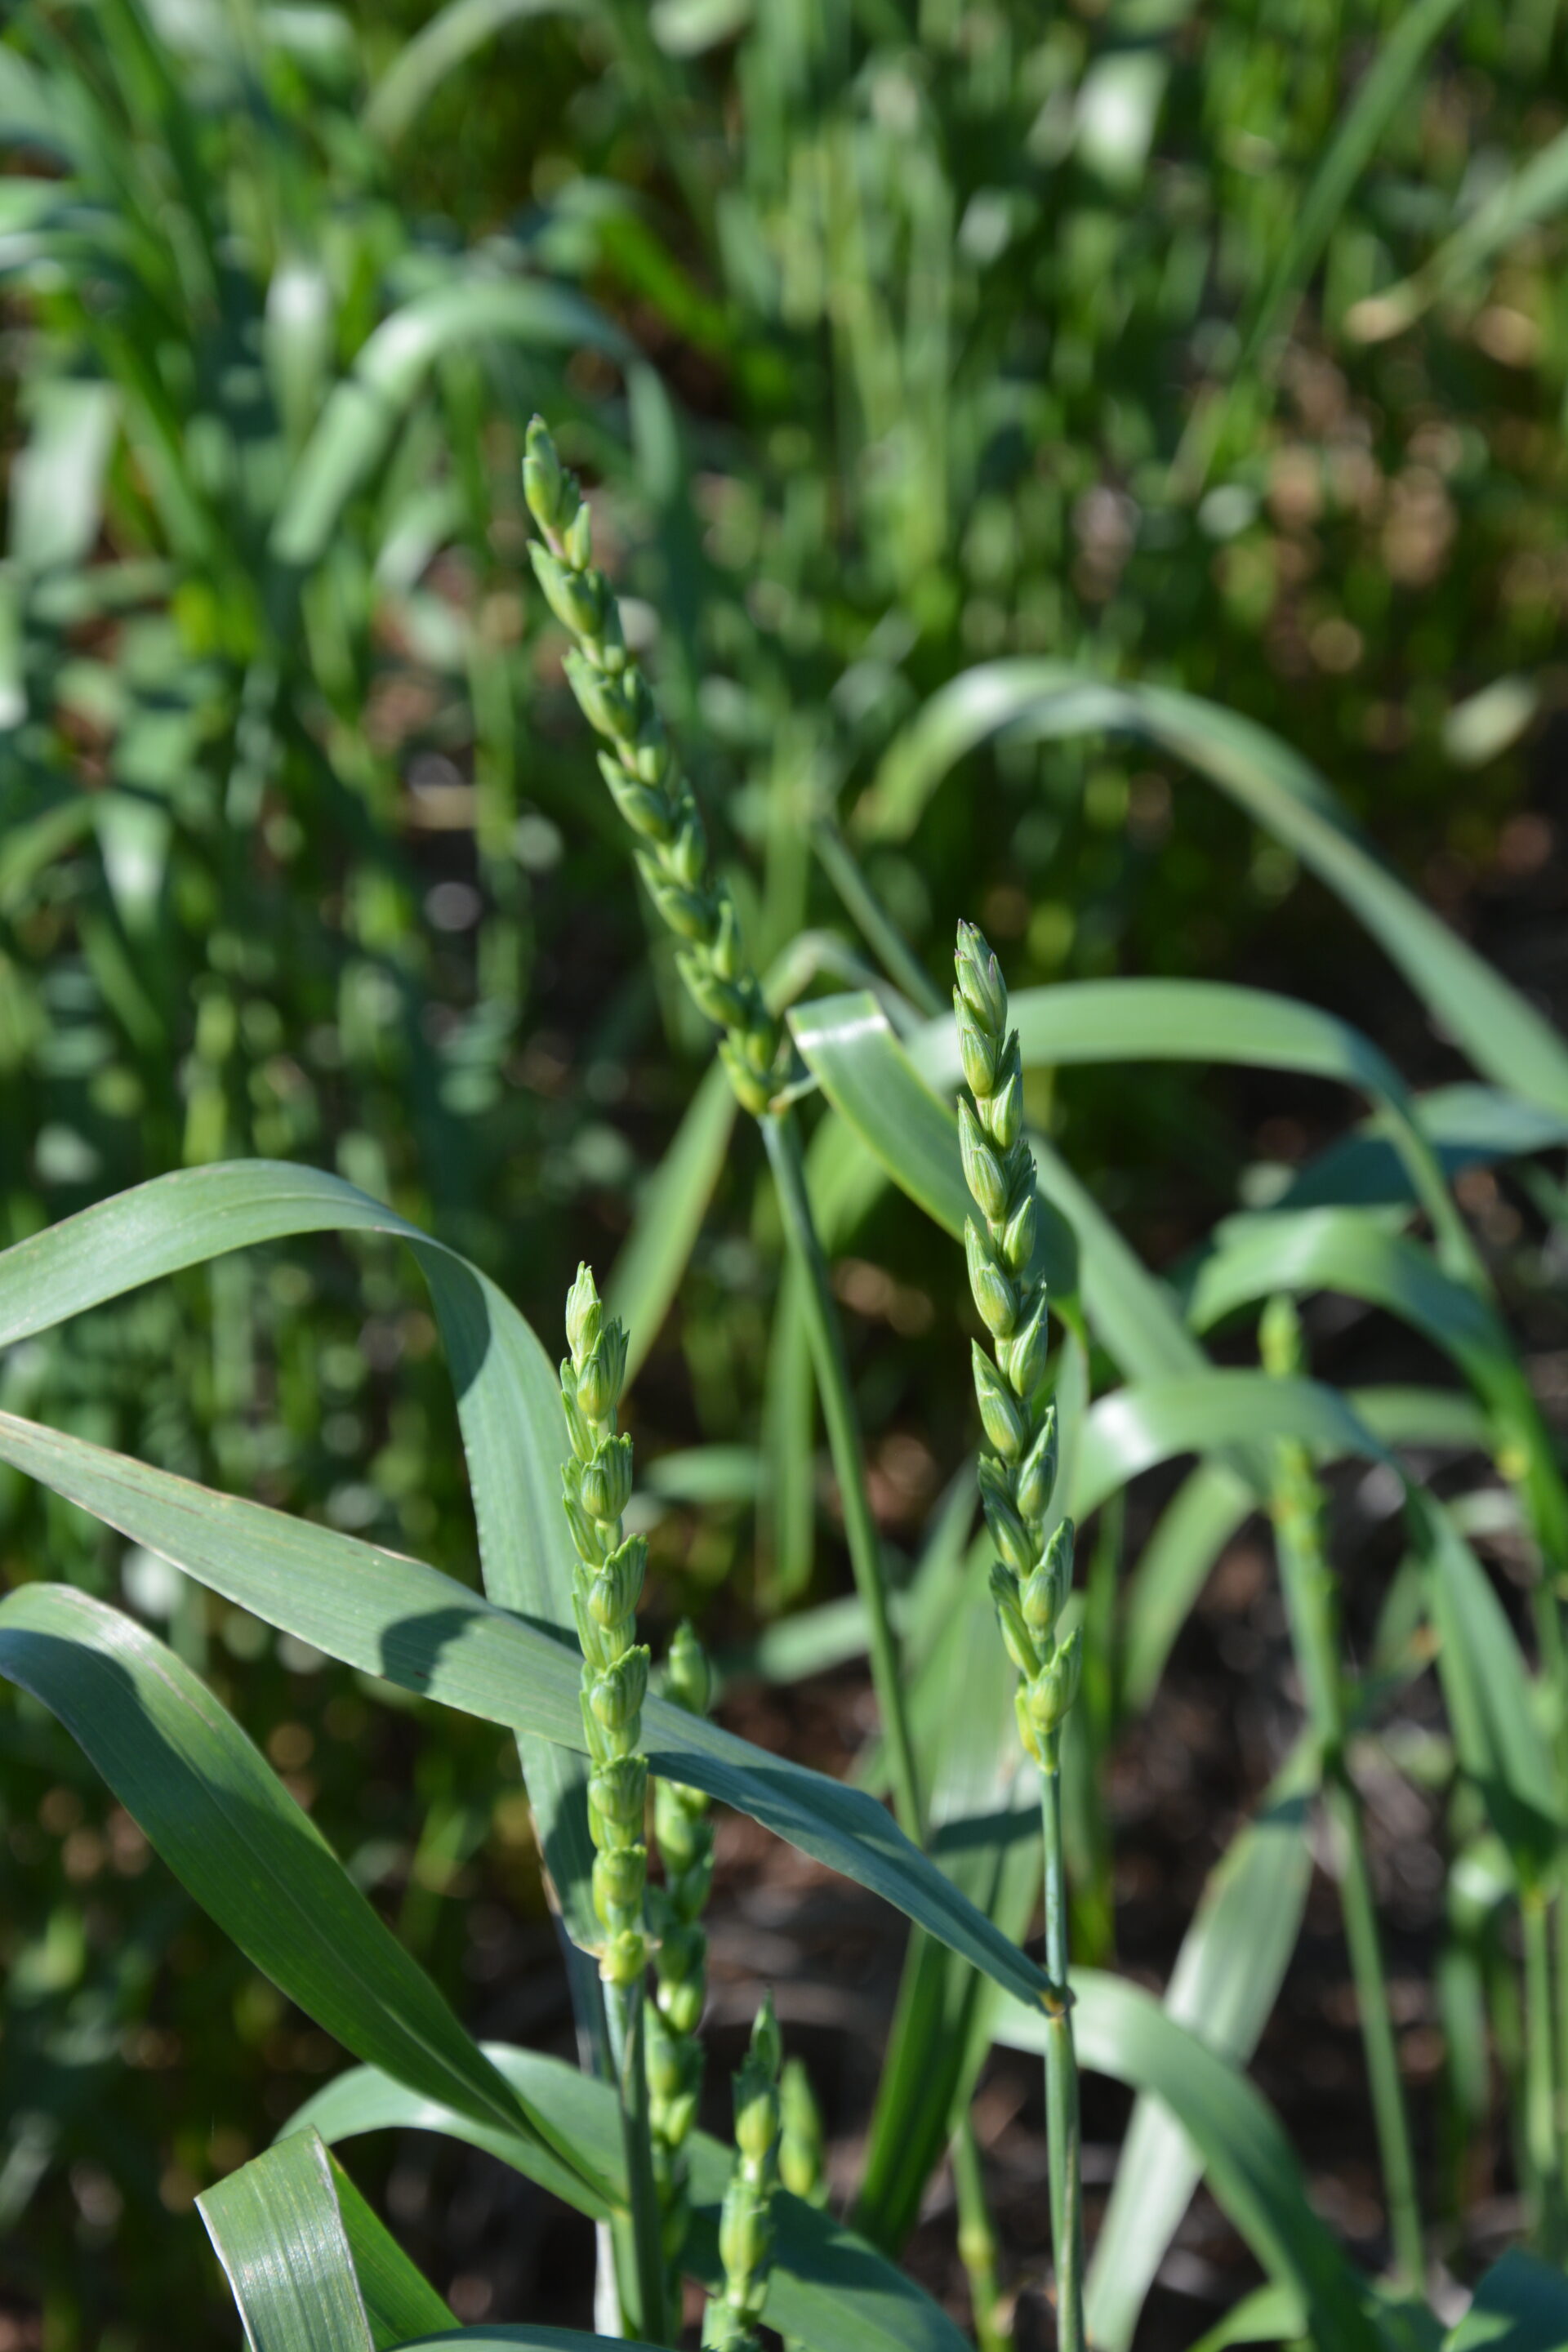 Development of dual purpose awnless wheat varieties for frost management (LPB117)